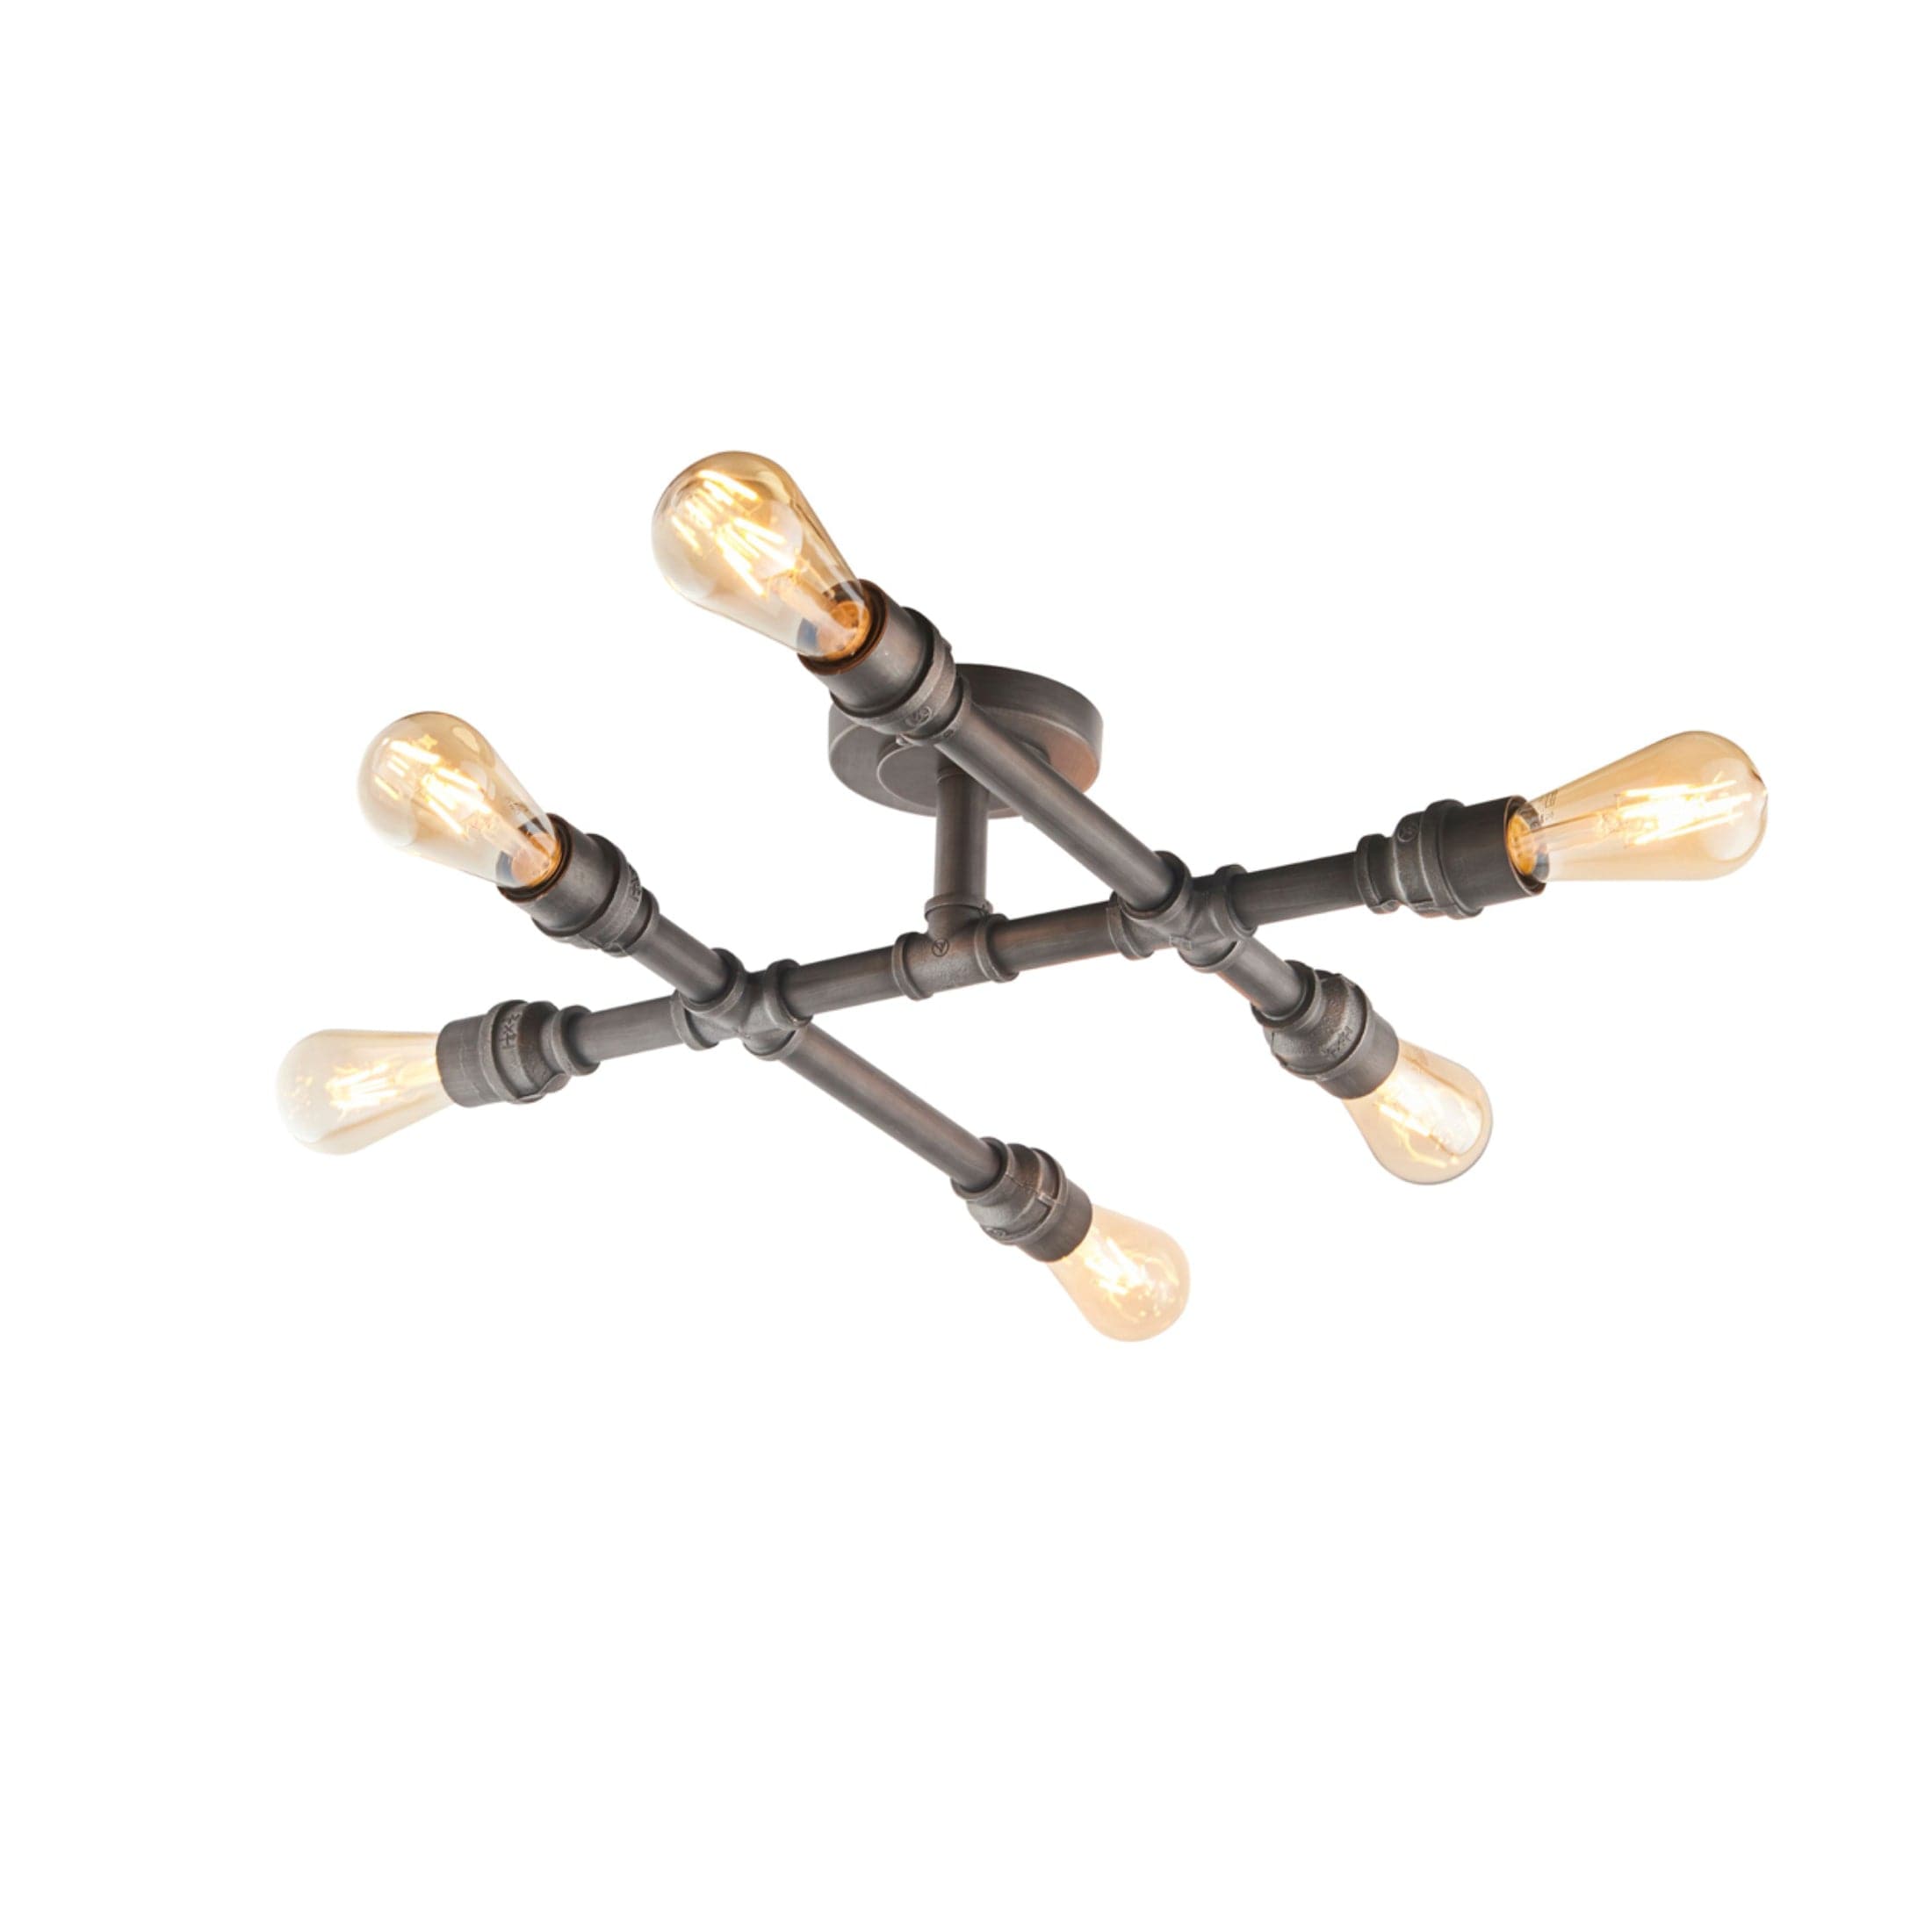 Industrial Pipe Ceiling Light 5